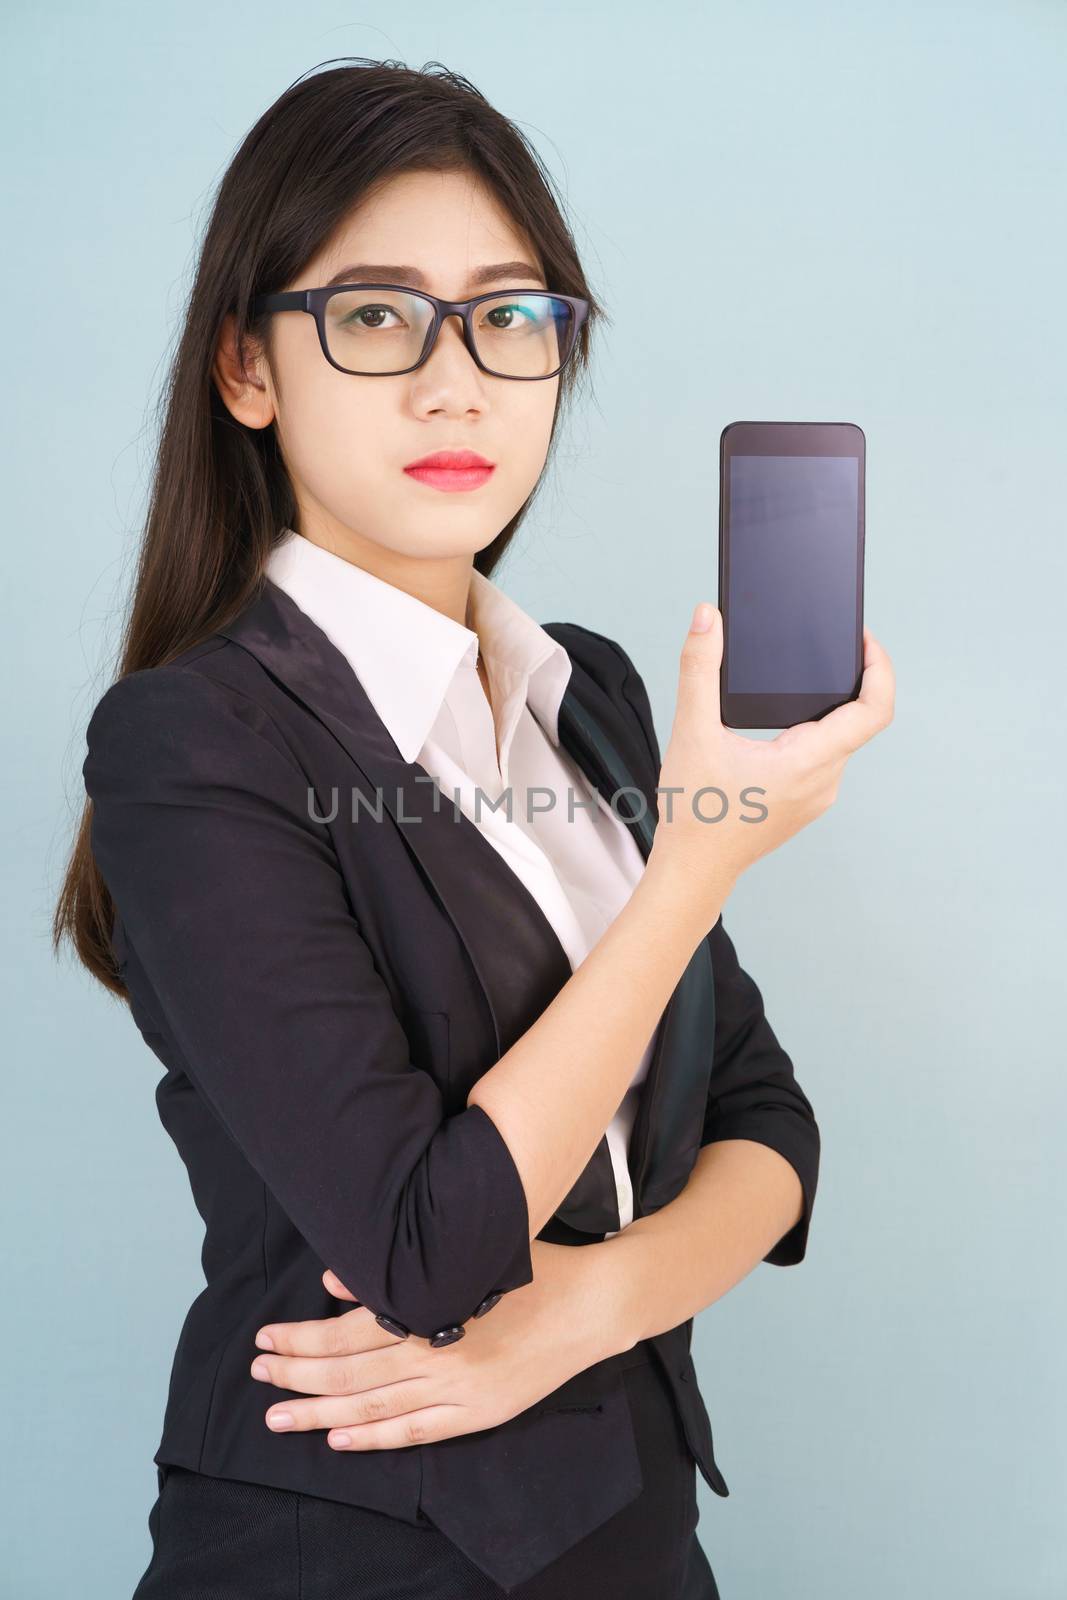 Young women in suit holding her smartphone standing against blue background